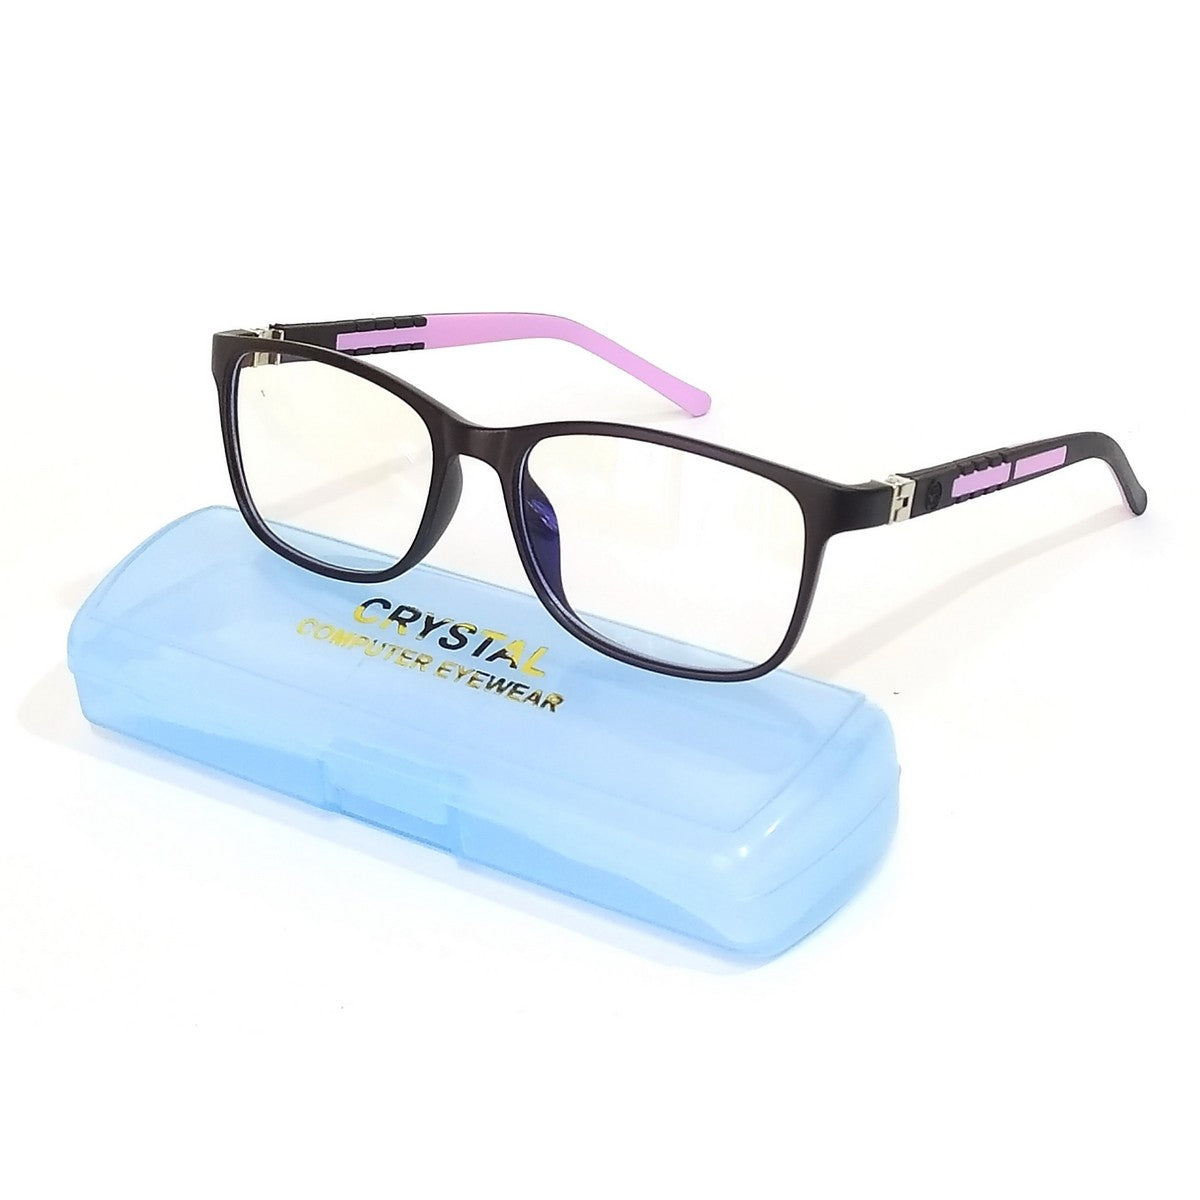 Stylish Black & Pink Square Kids Blue Light Blocking Glasses - Tailored for 6-10 Year Olds